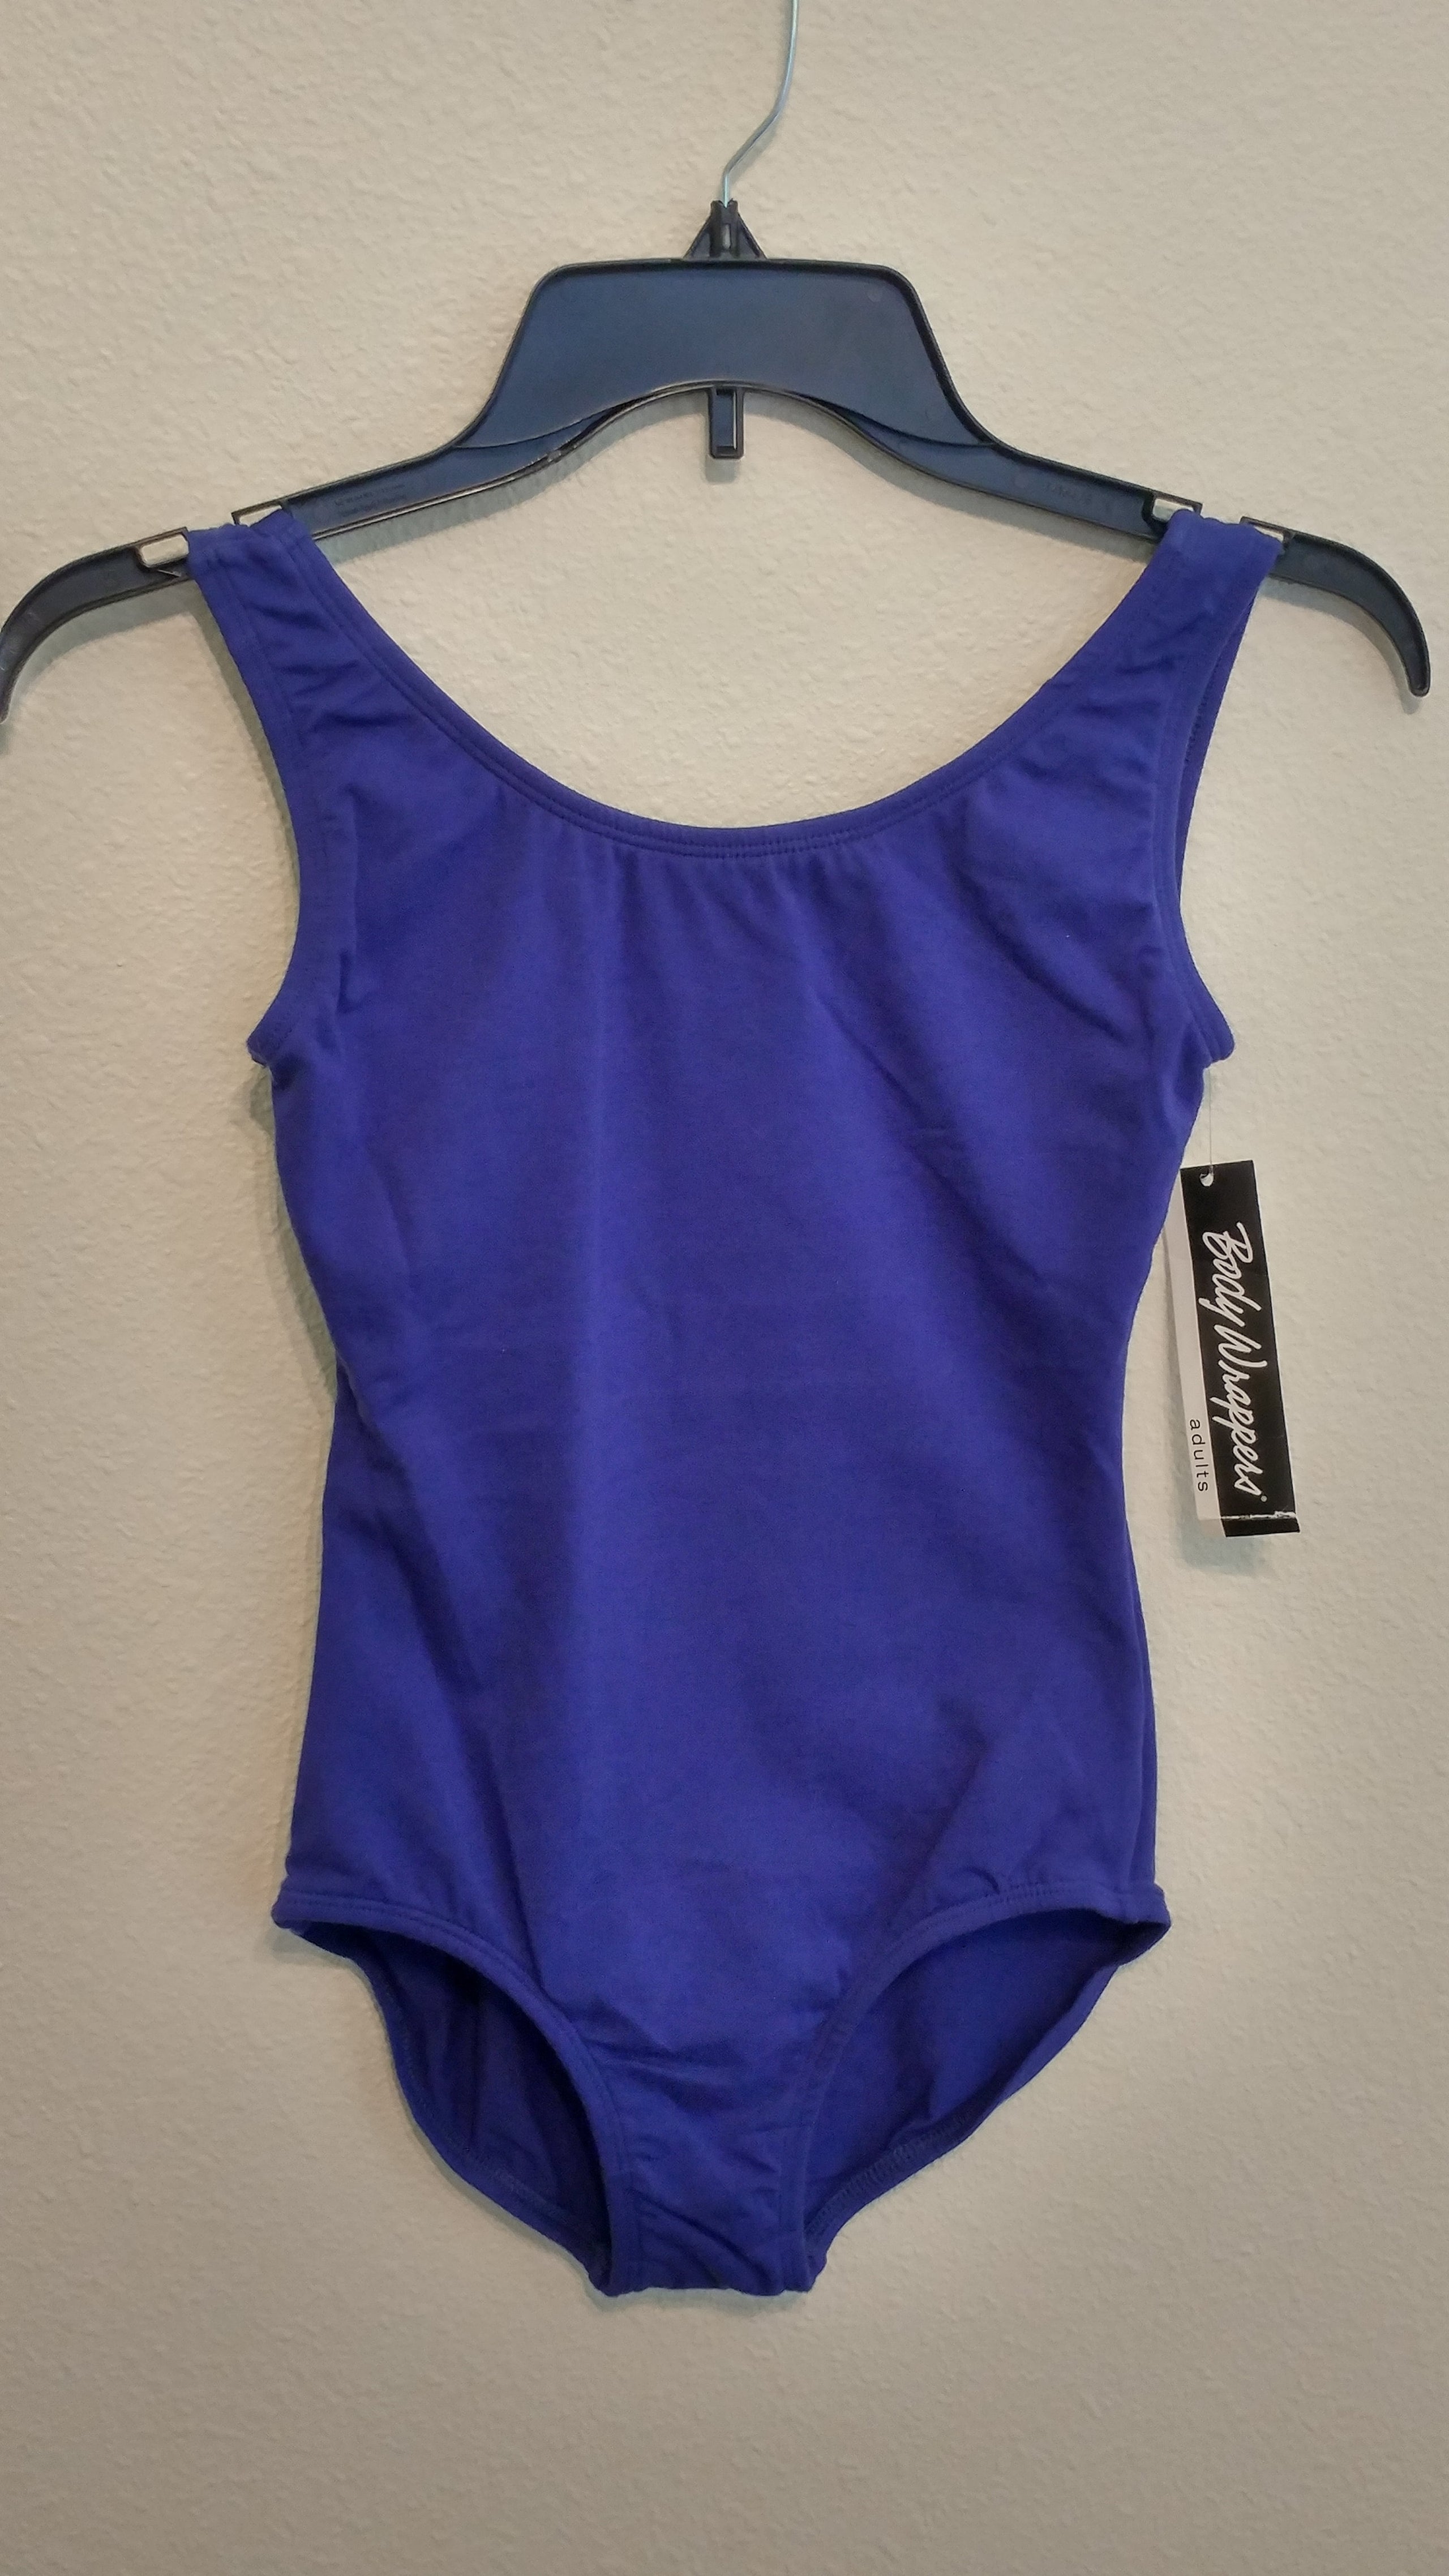 *Classic Tank Leotard - #315 - ADULT - (Variety of color options)